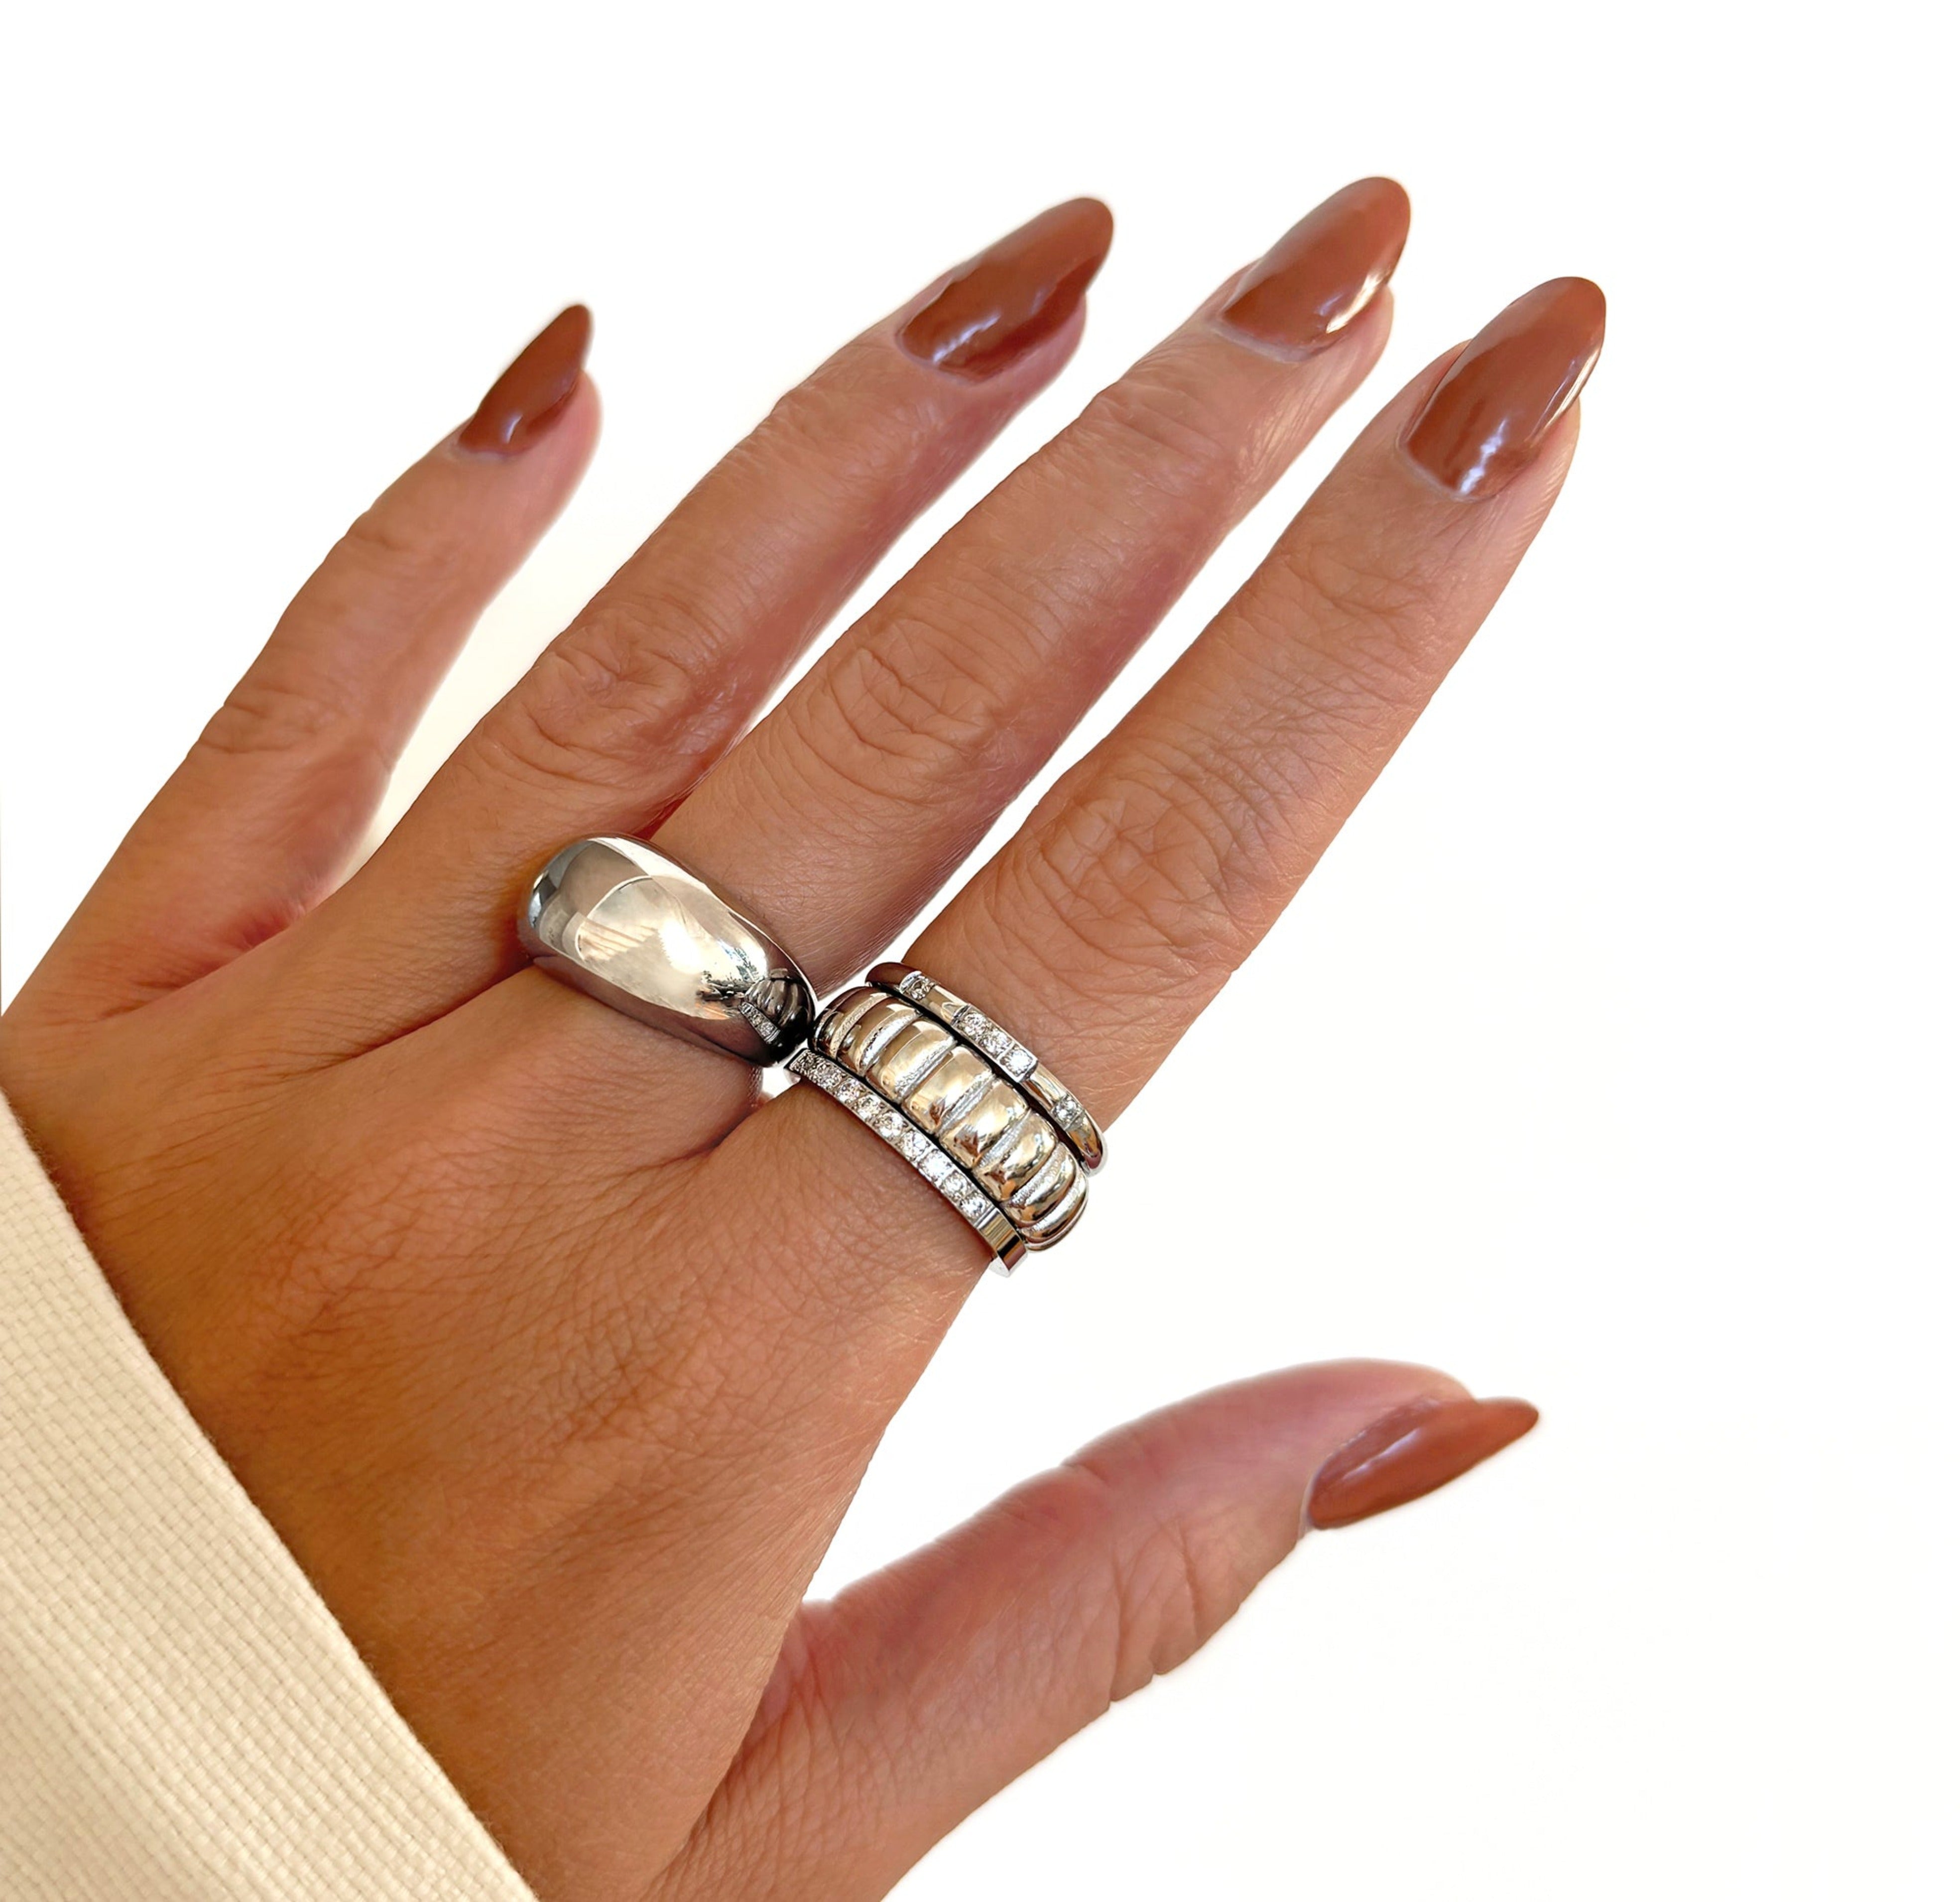 Silver bubbkenring stacked with Harriet ribbed ring. Silver waterproof jewelry